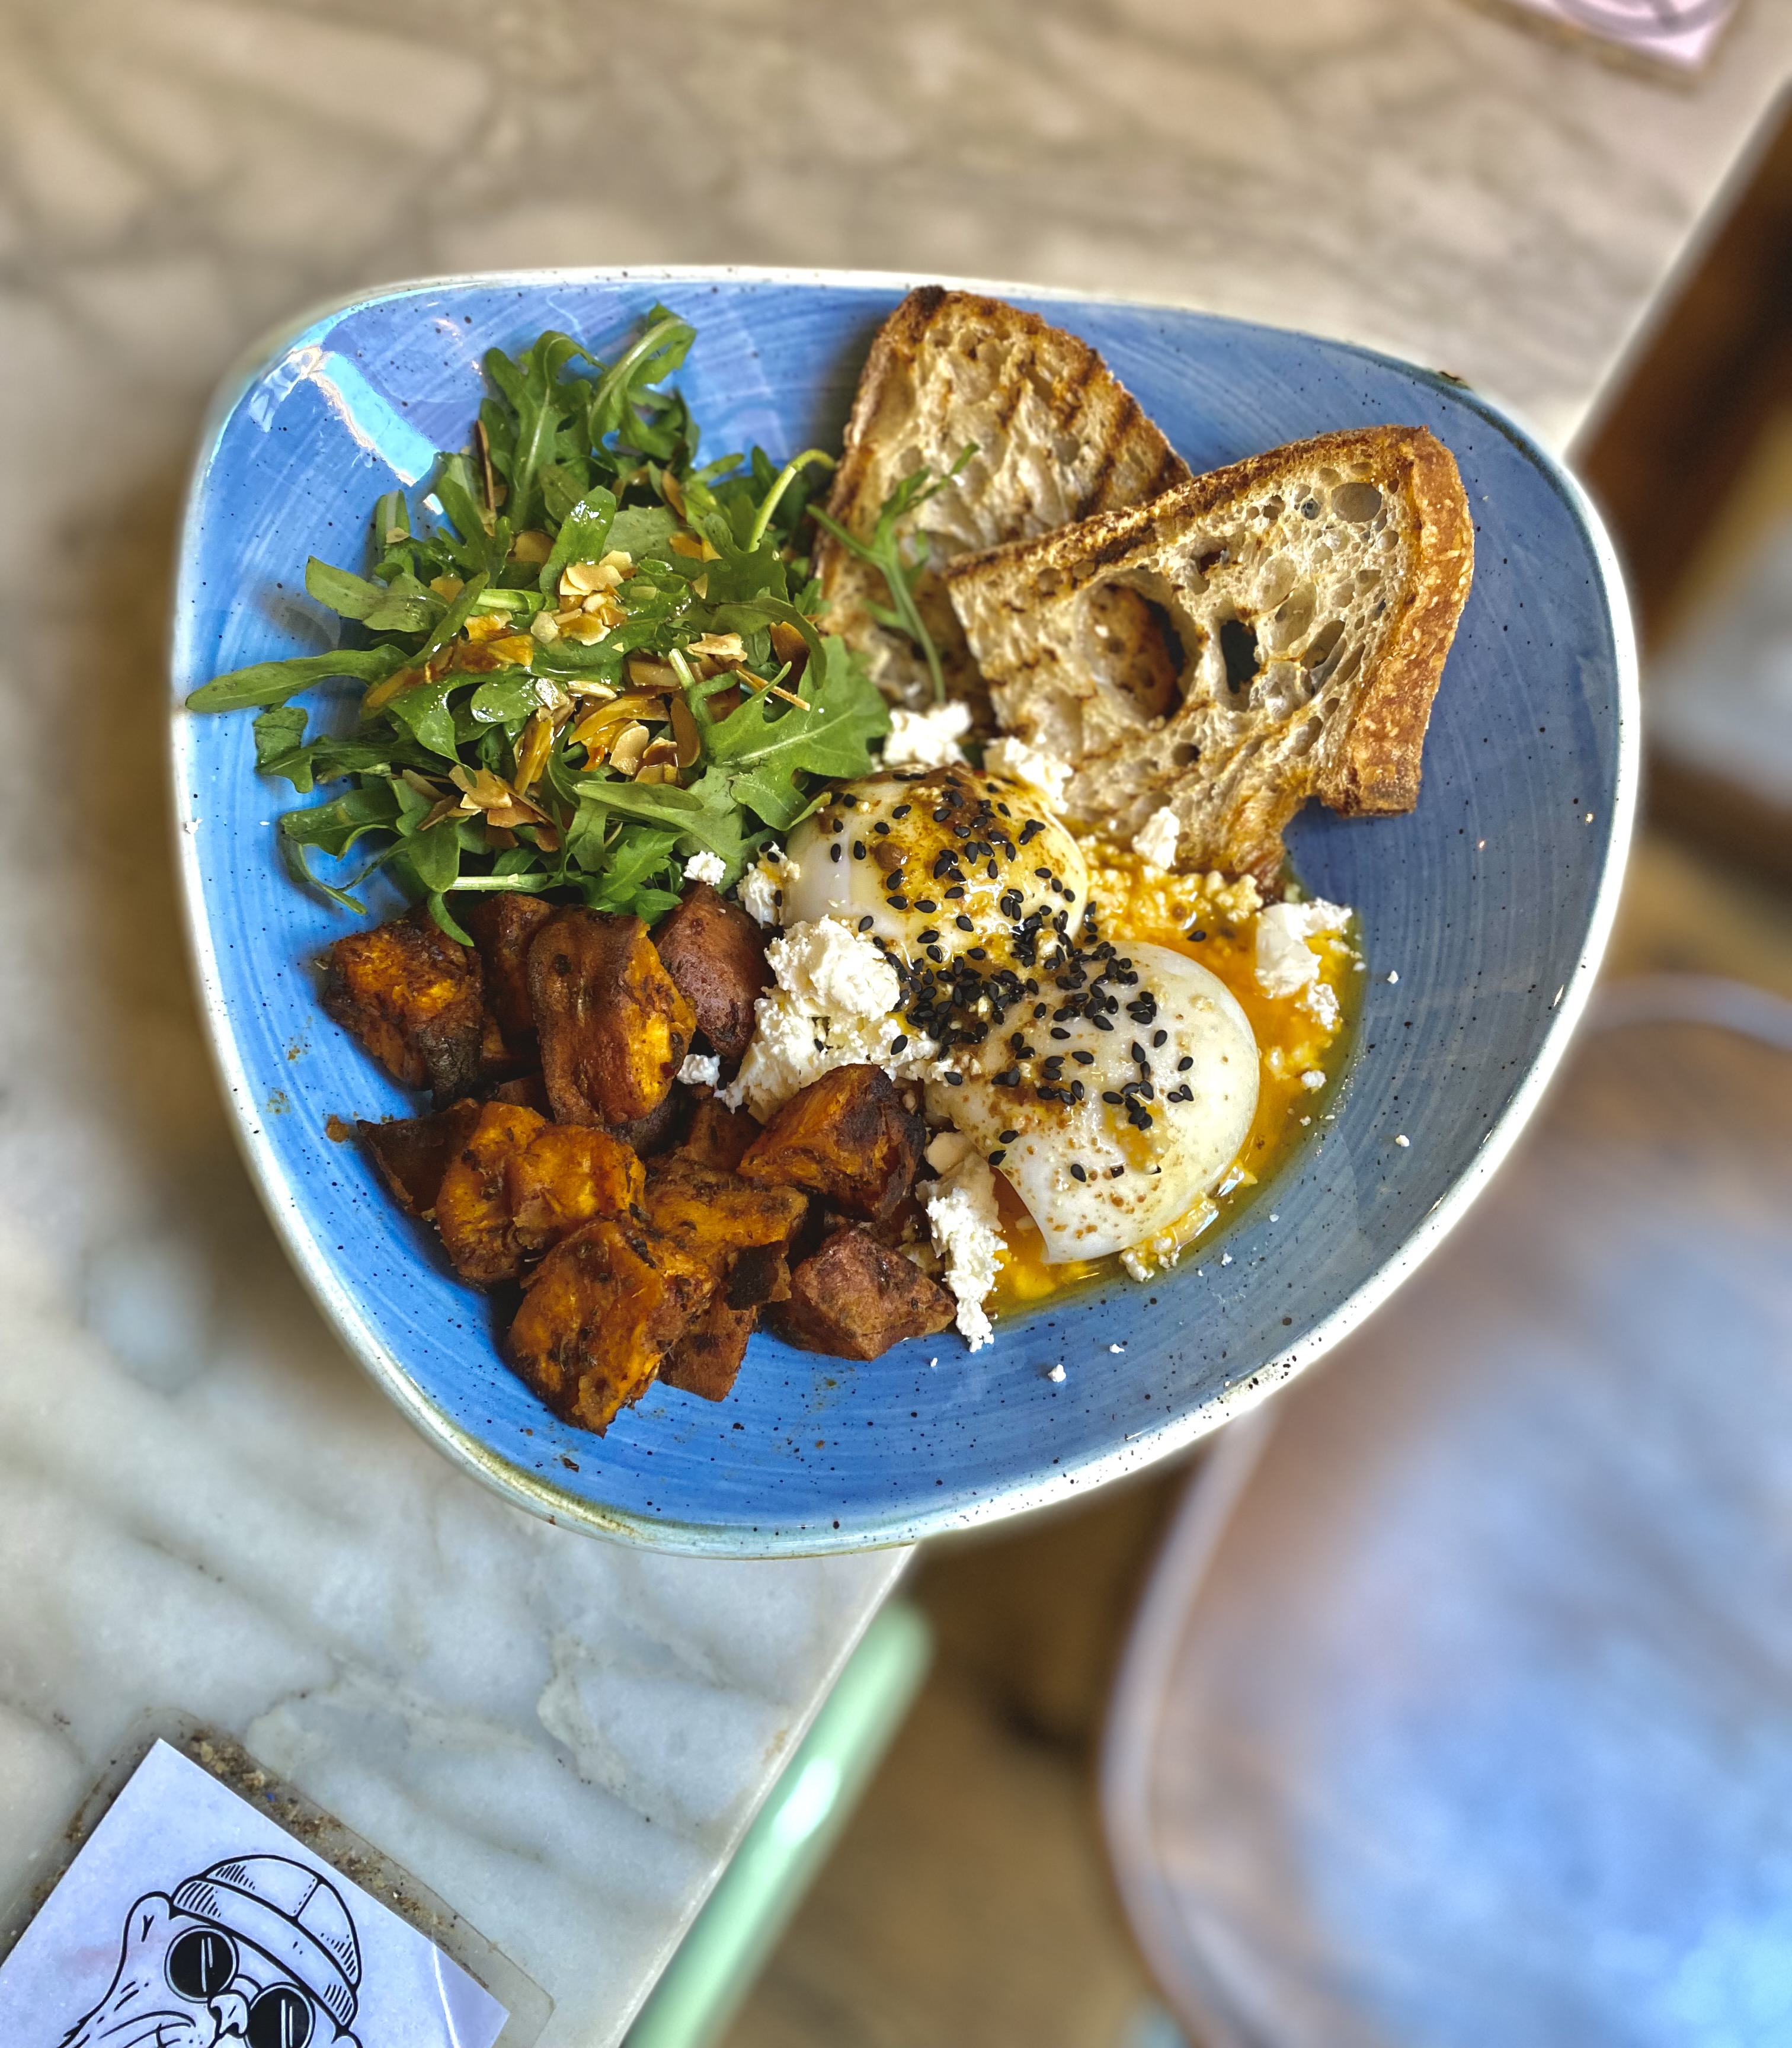 TURKISH EGGS: Greek yogurt bowl with two poached eggs, arugula, roasted sweet potato, paprika sauce, queso feta. Served with toasted sourdough bread.